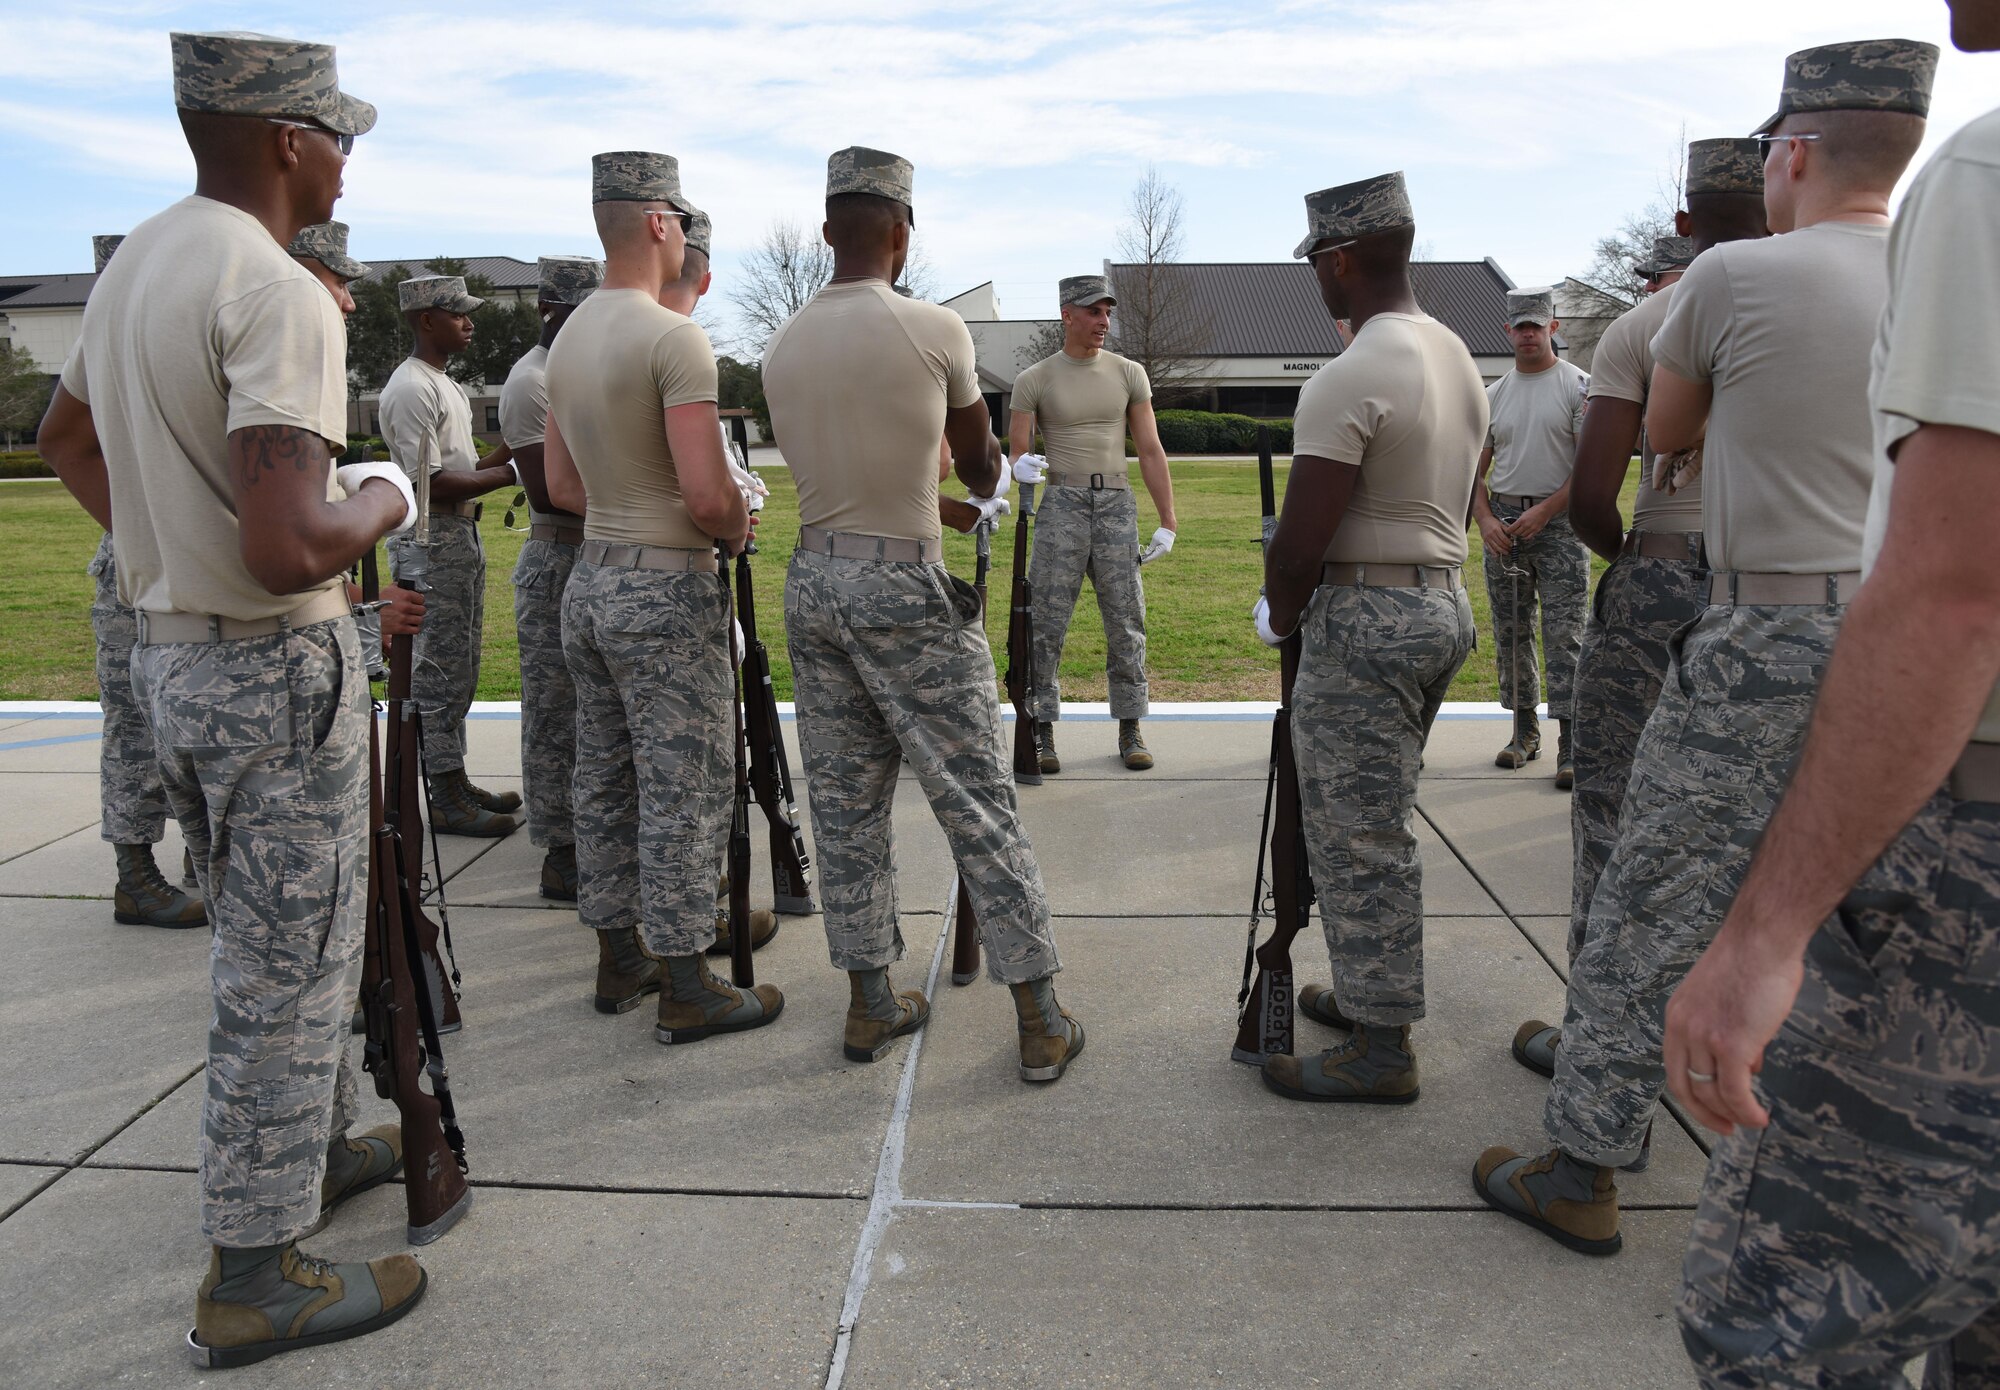 Senior Airman Angelo Hightower, U.S. Air Force Honor Guard Drill Team lead trainer, provides instruction during the practice of a new routine on the Levitow Training Support Facility drill pad Feb. 14, 2017, on Keesler Air Force Base, Miss. The team comes to Keesler every year for five weeks to develop a new routine, which is then revealed during an 81st Training Group drill down competition. The team preforms the routine used throughout the year. (U.S. Air Force photo by Kemberly Groue)